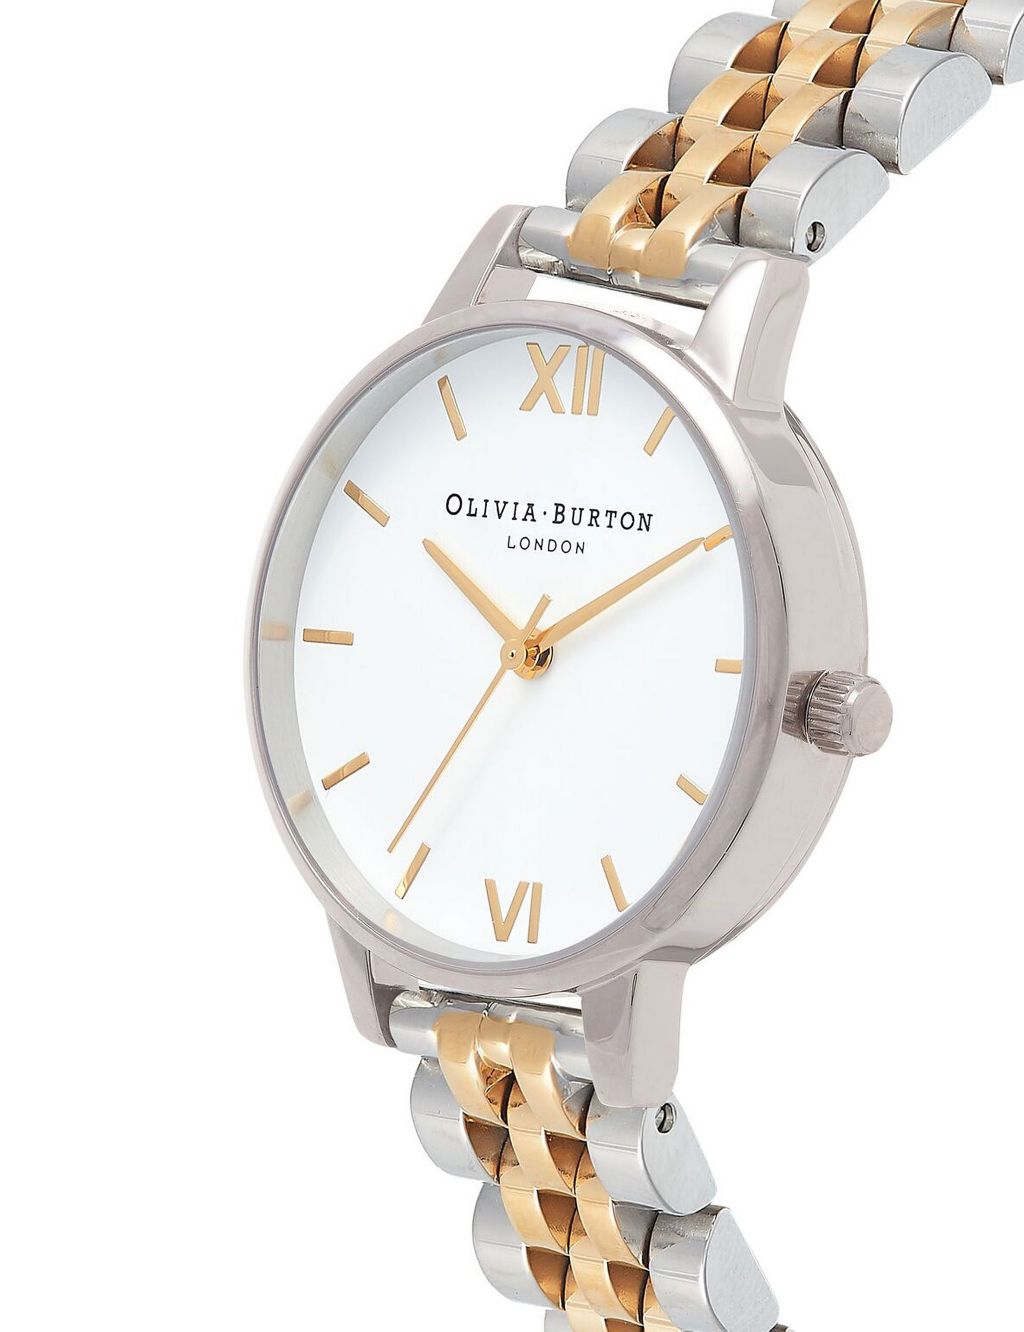 Olivia Burton Stainless Steel Silver & Rose Gold Watch image 2